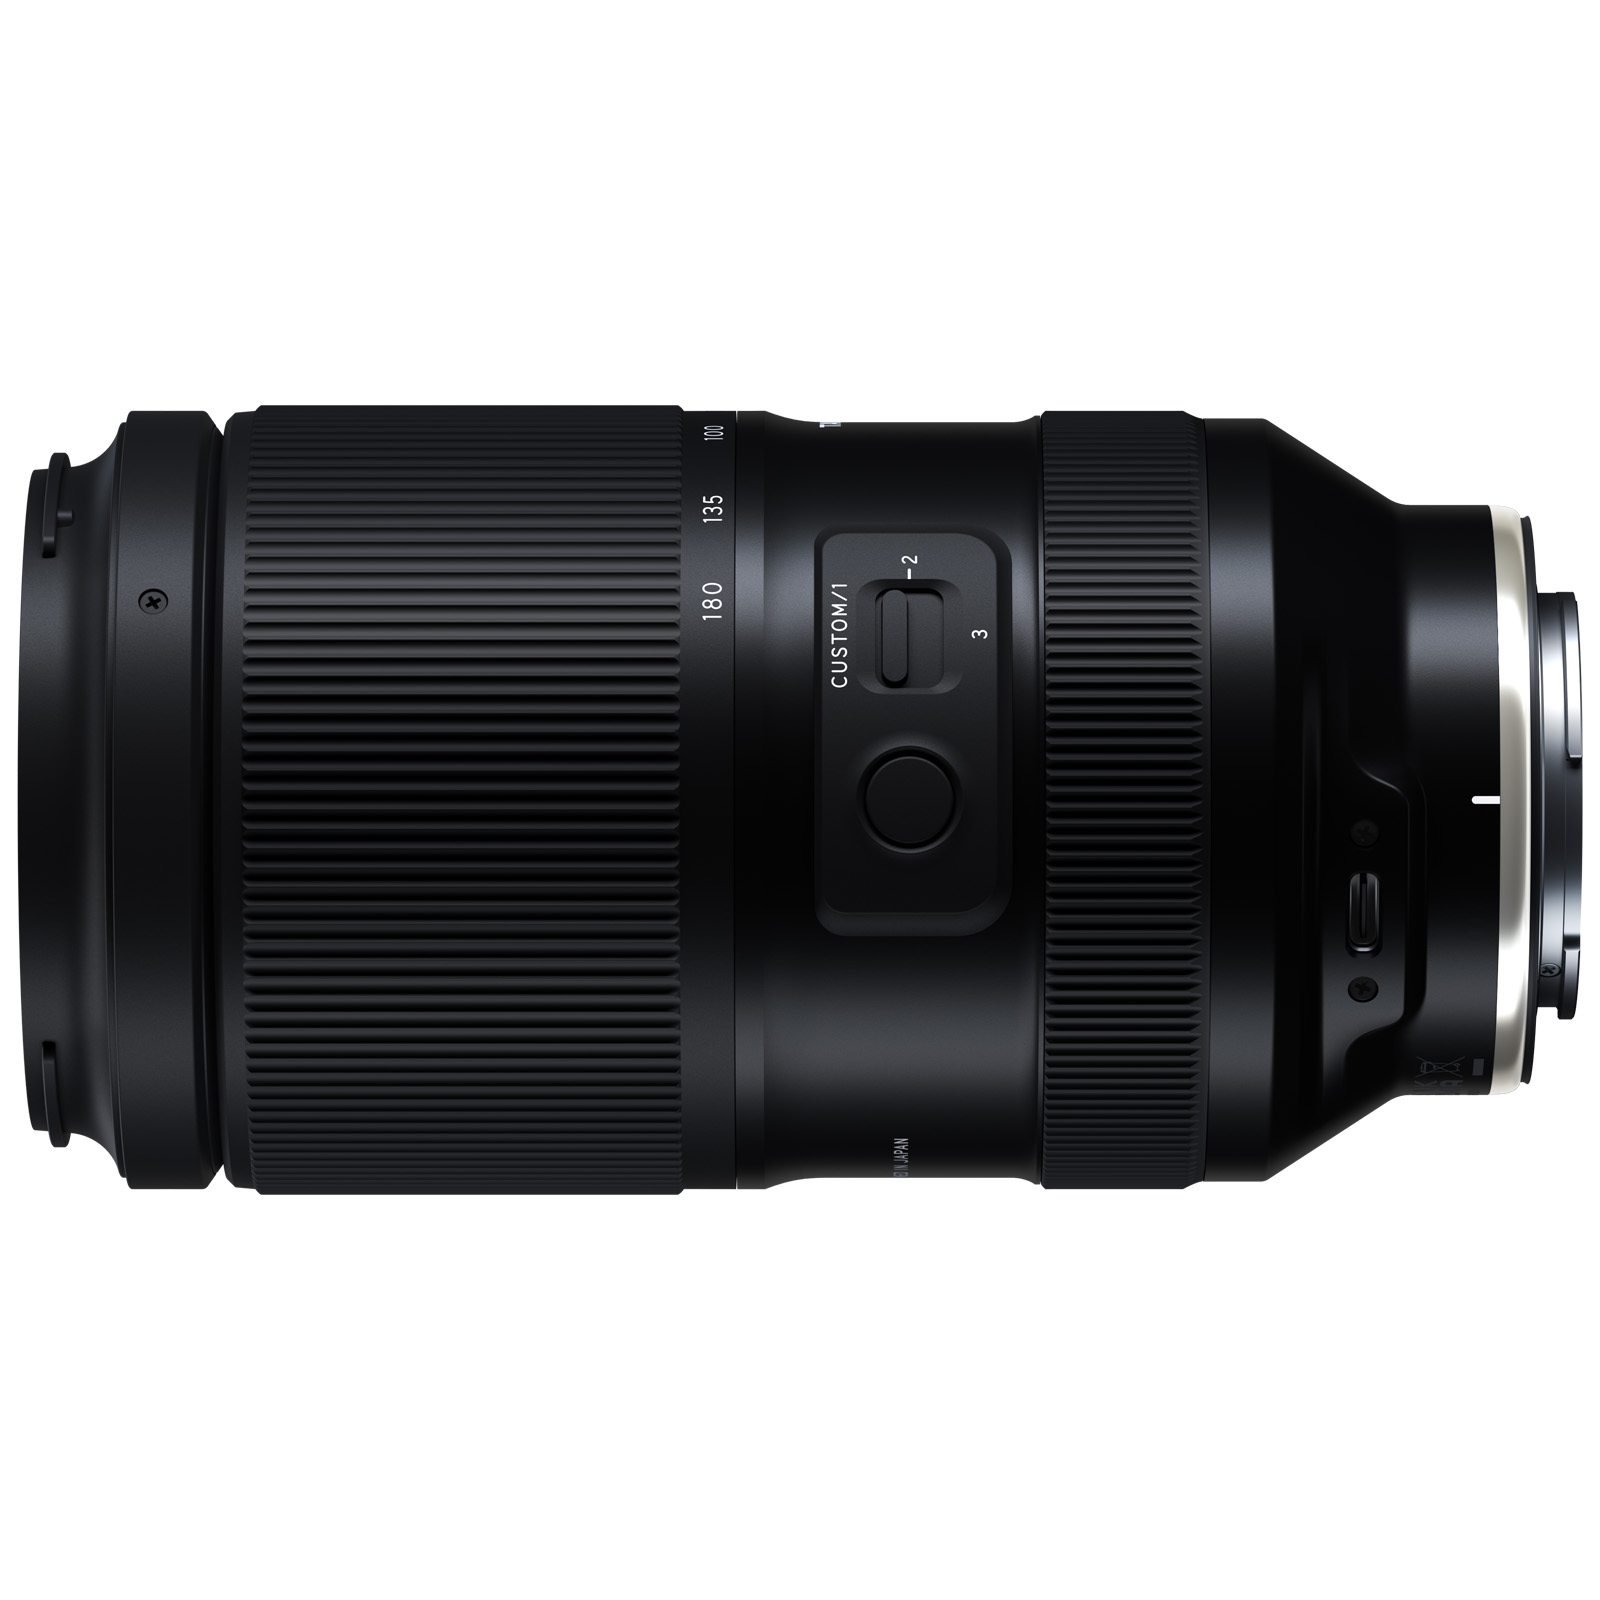 Tamron 70-180mm f2.8 Di III VXD G2 Lens for Sony E | Wex Photo Video